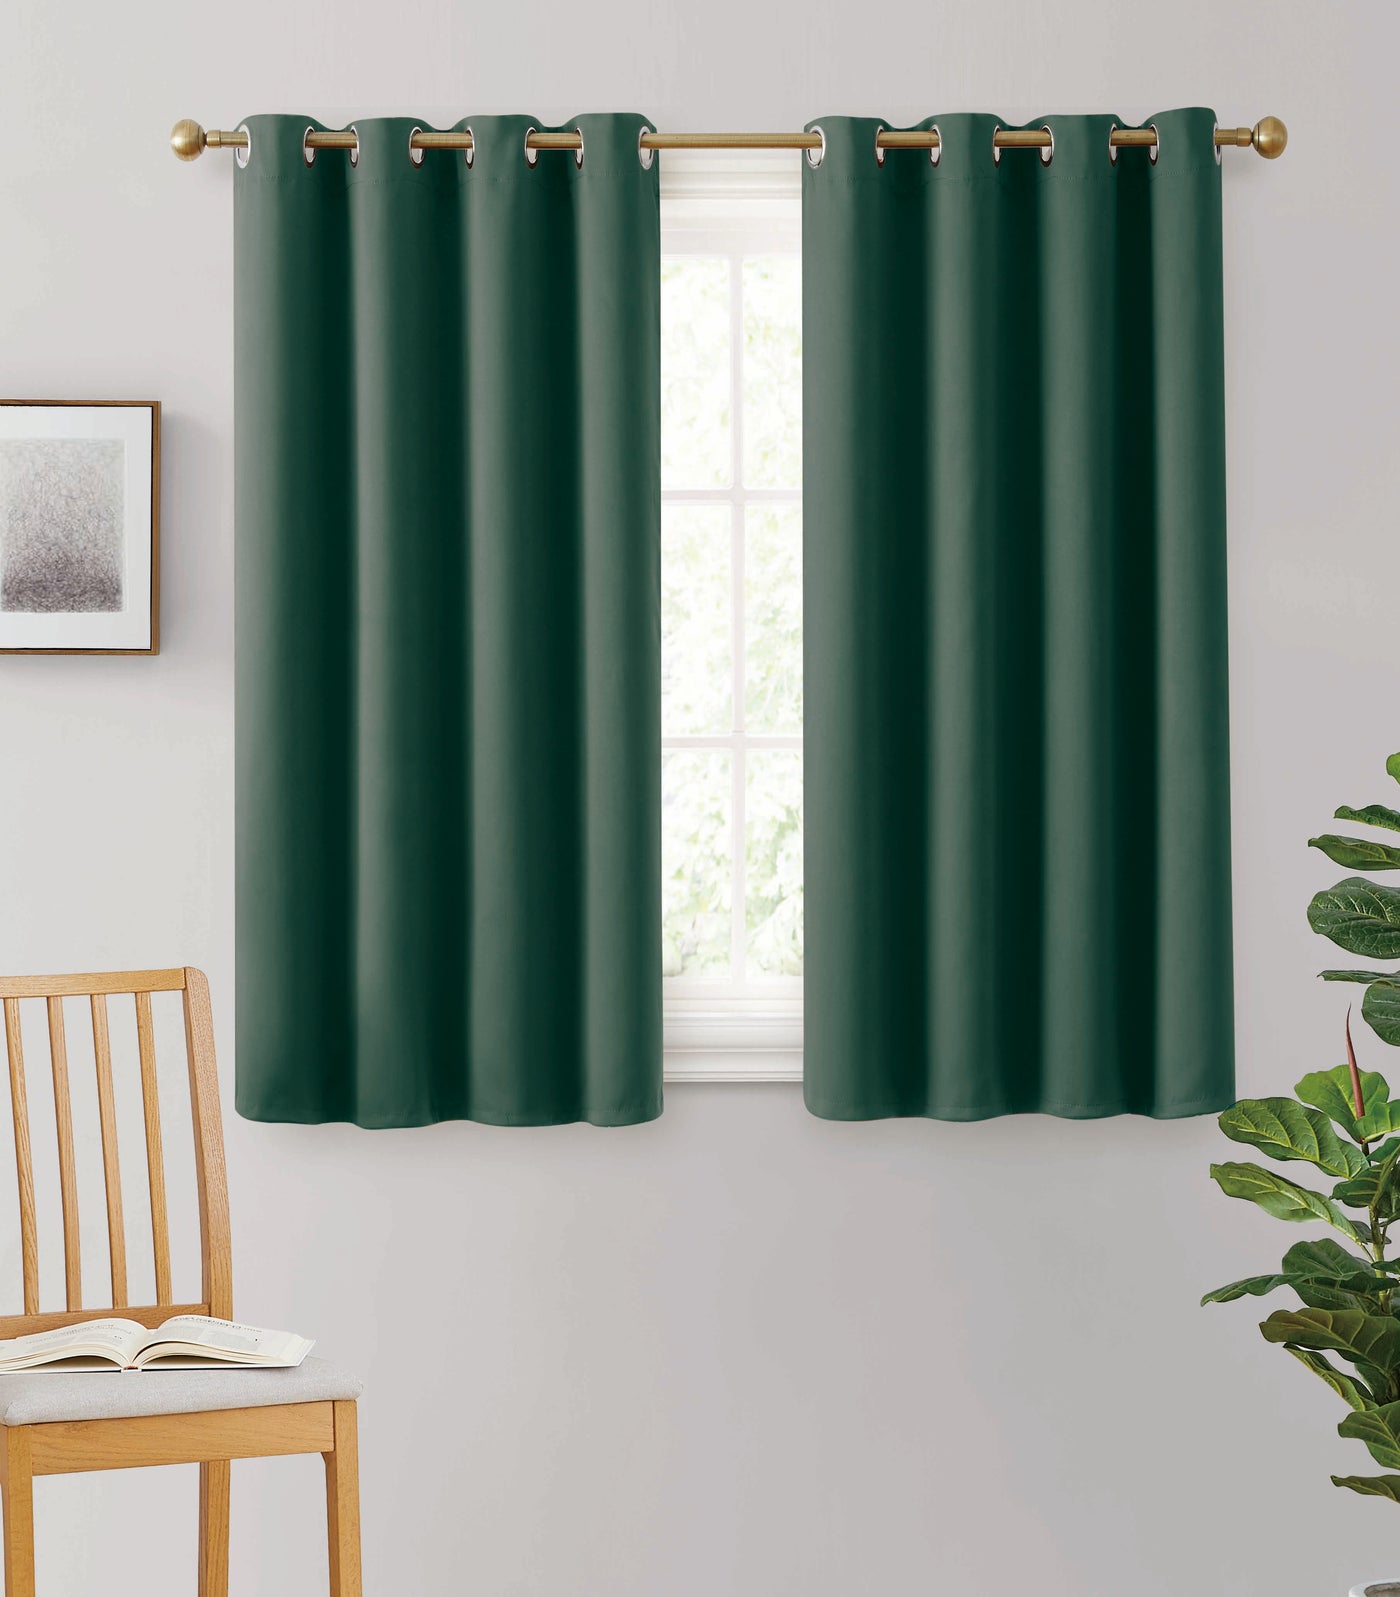 2pc Solid Grommet Thermal Insulated Window Curtain Panels Room Darkening Blackout 63" | Jenin Home Furnishing.